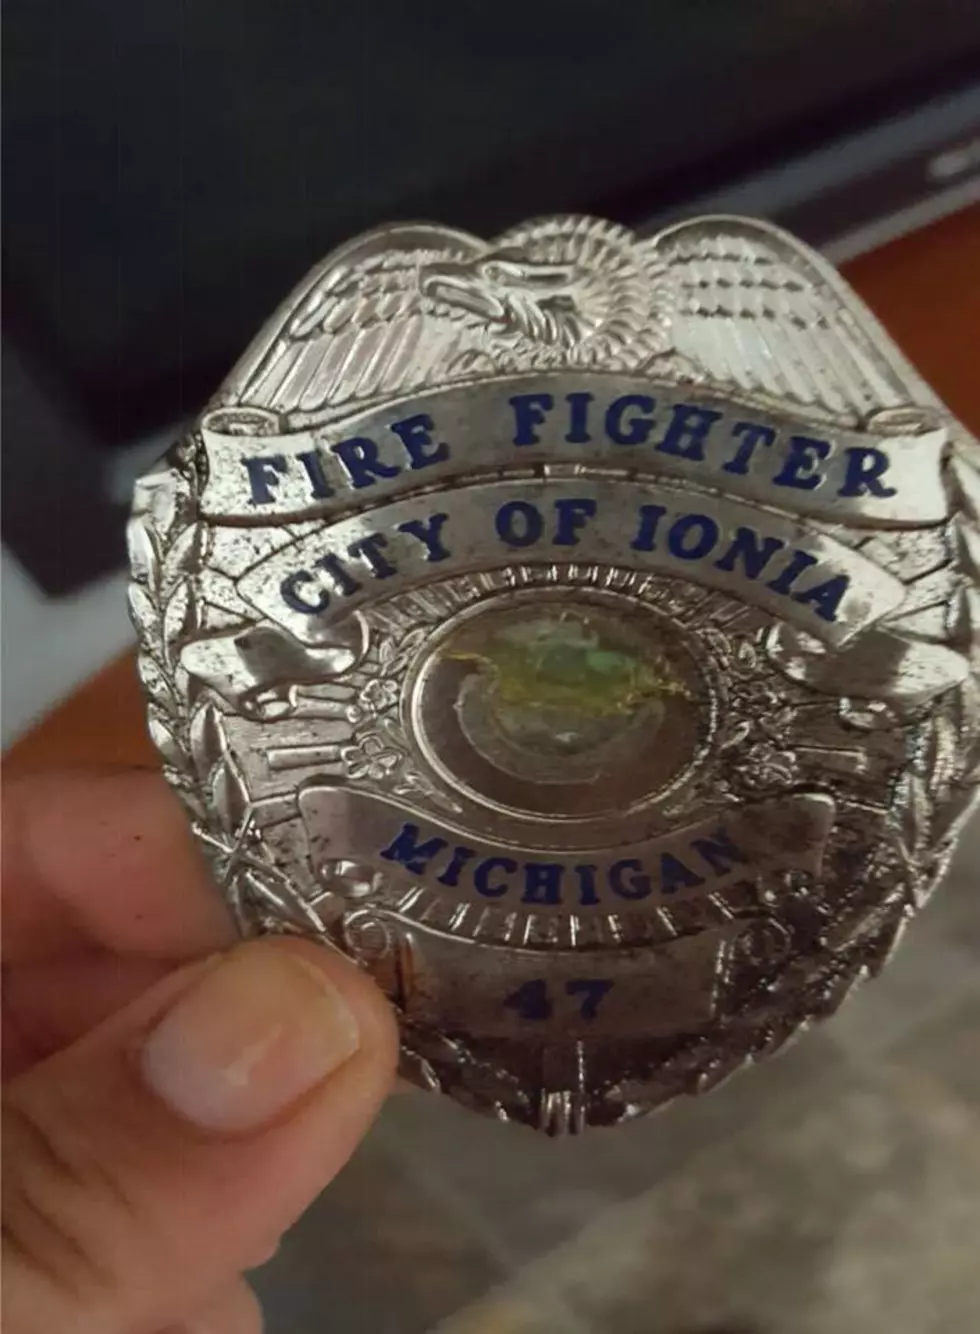 Woman Searches For Owner Of This Lost Badge